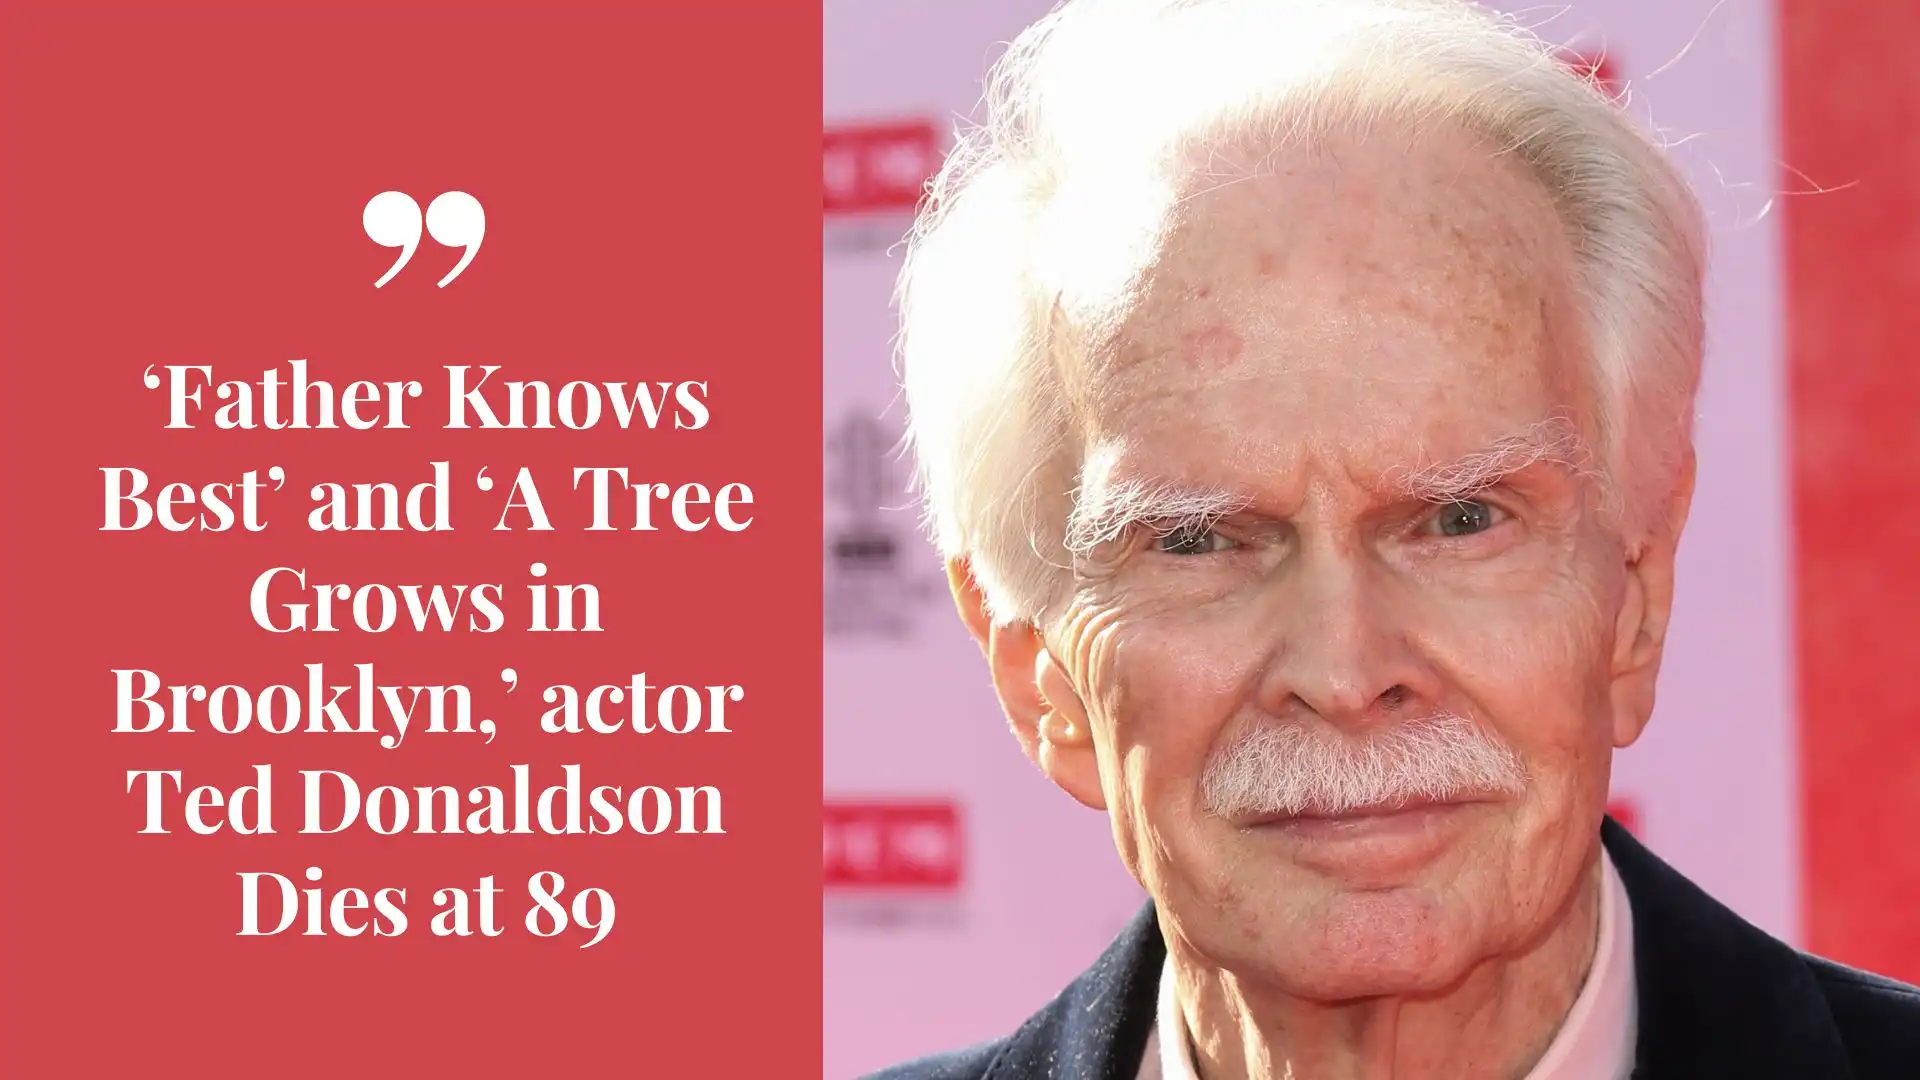 ‘Father Knows Best’ and ‘A Tree Grows in Brooklyn,’ actor Ted Donaldson Dies at 89 (Image credit: Ted)